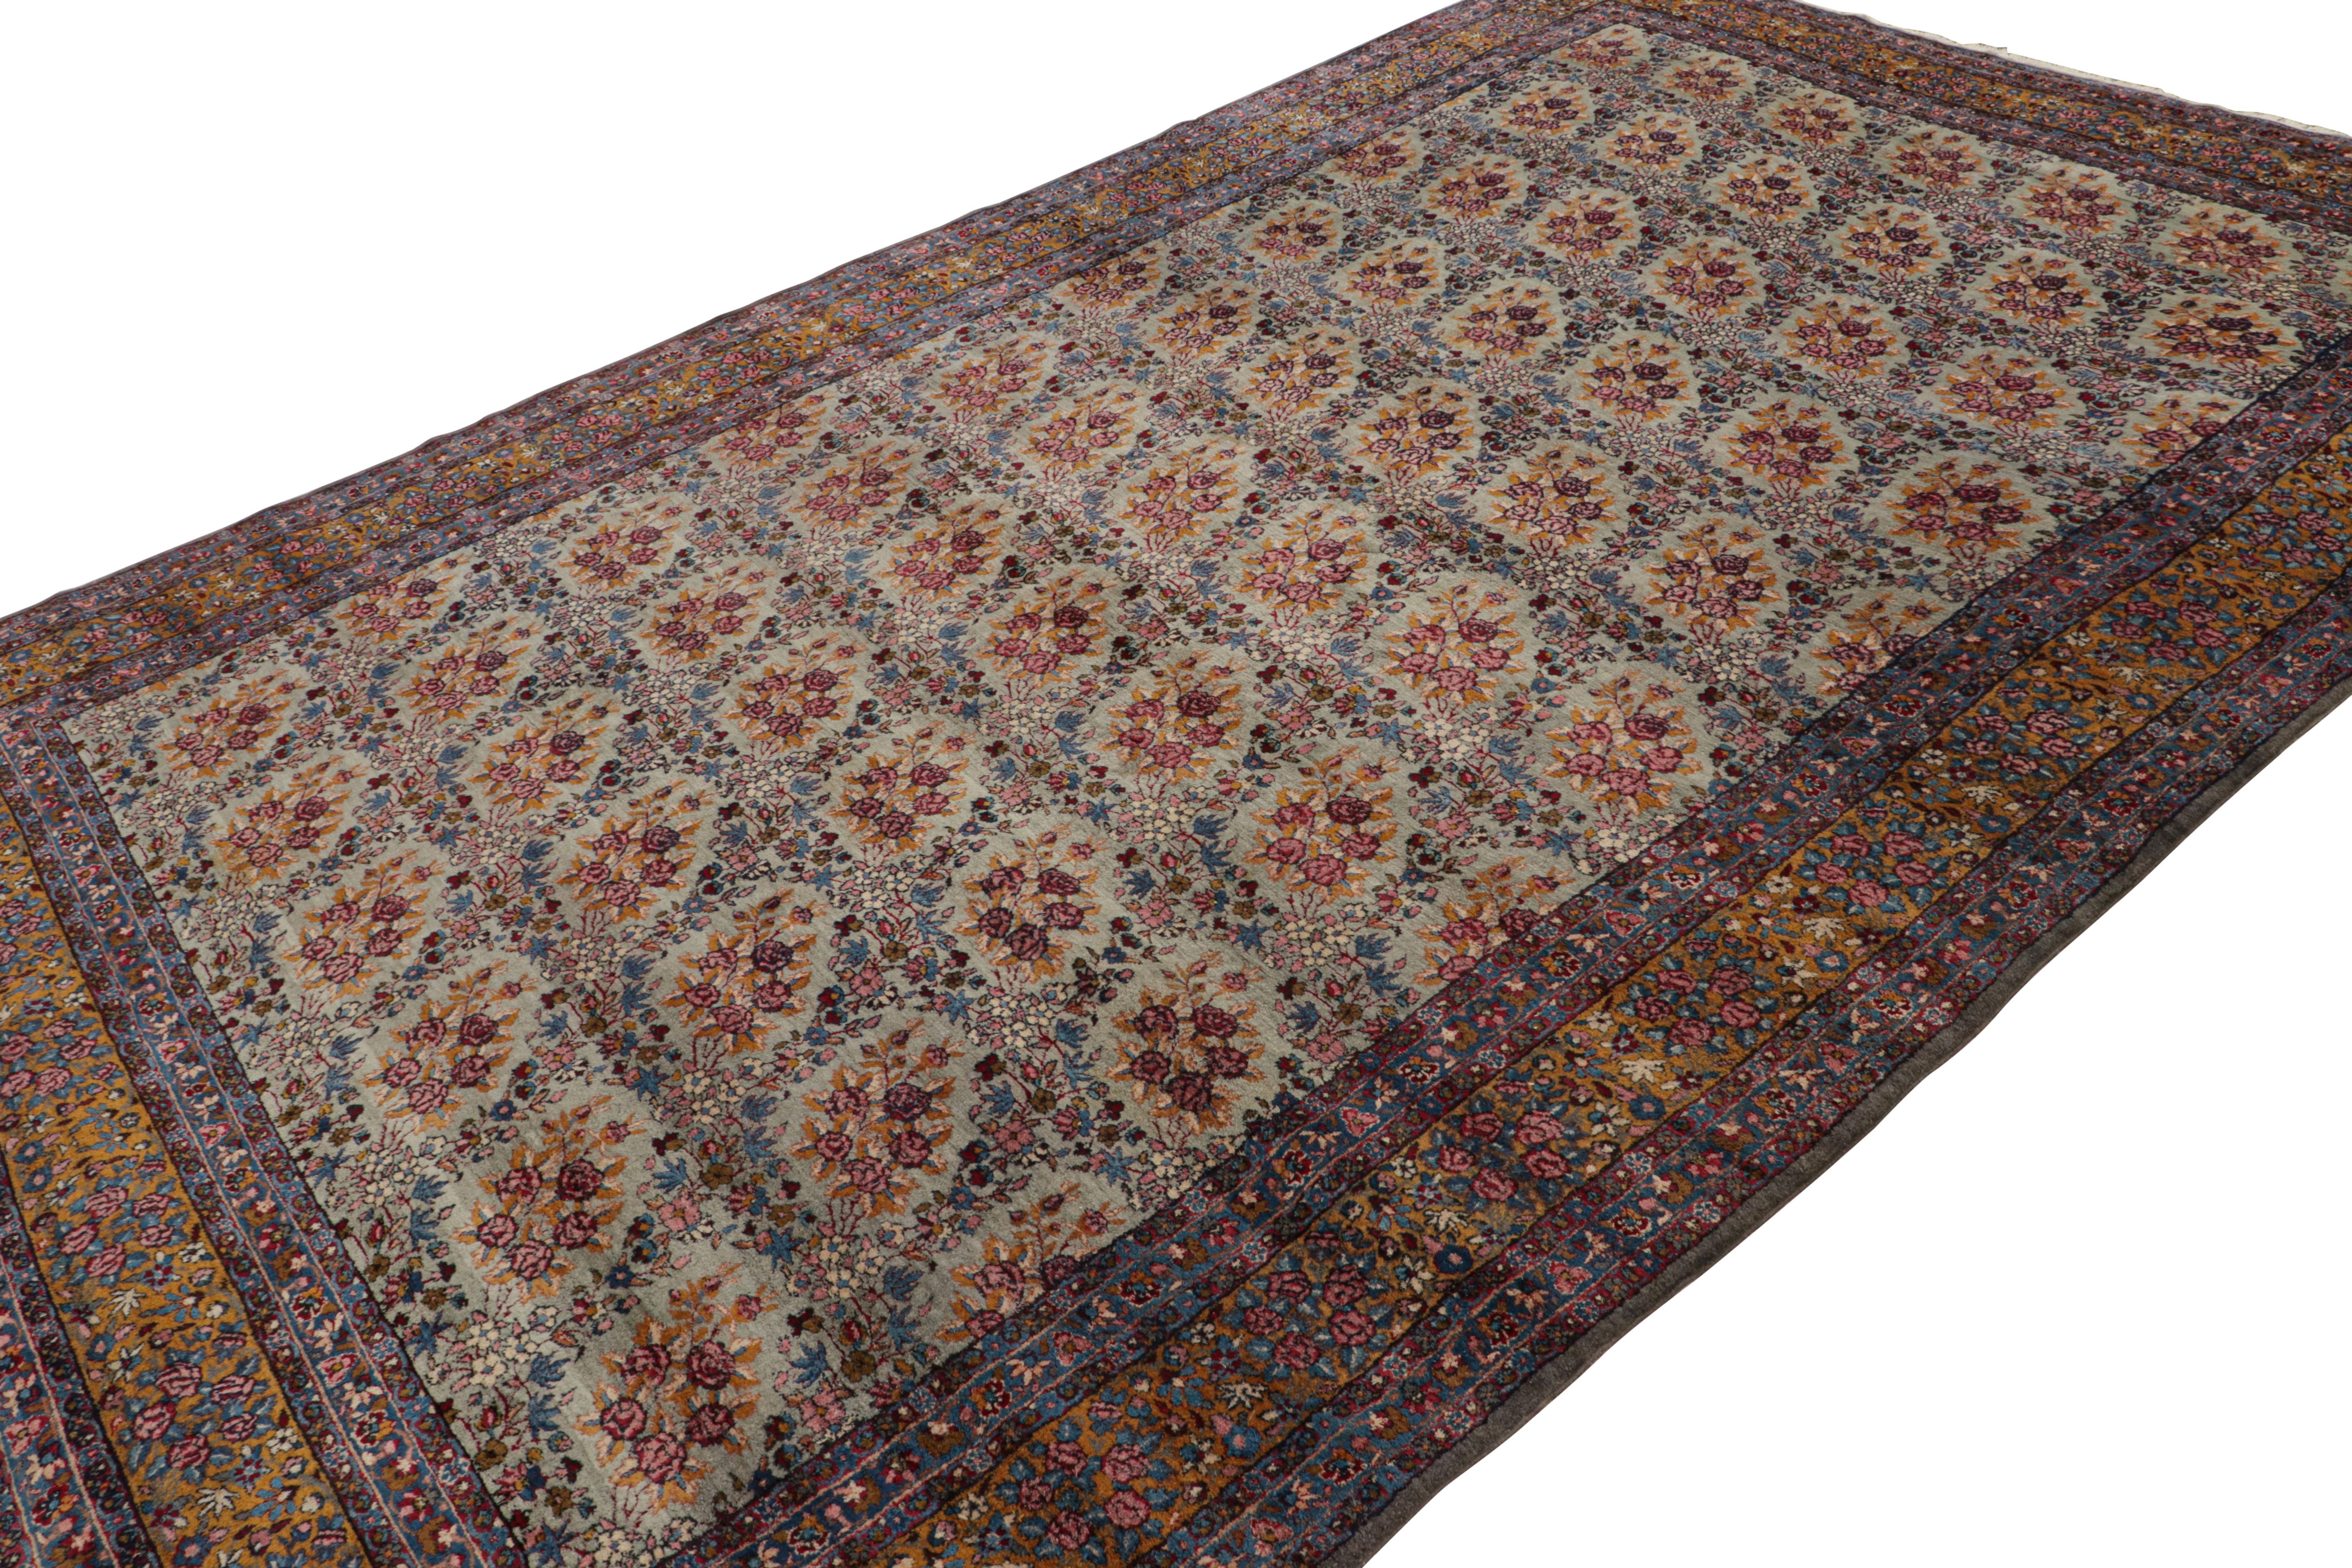 Hand-knotted in wool, an antique 9x14 Persian Kerman rug from the 1920s - latest to join Rug & Kilim’s repertoire of coveted antique pieces.

On the Design:

This piece is polychromatic with a notable light blue-green field which underscores a most